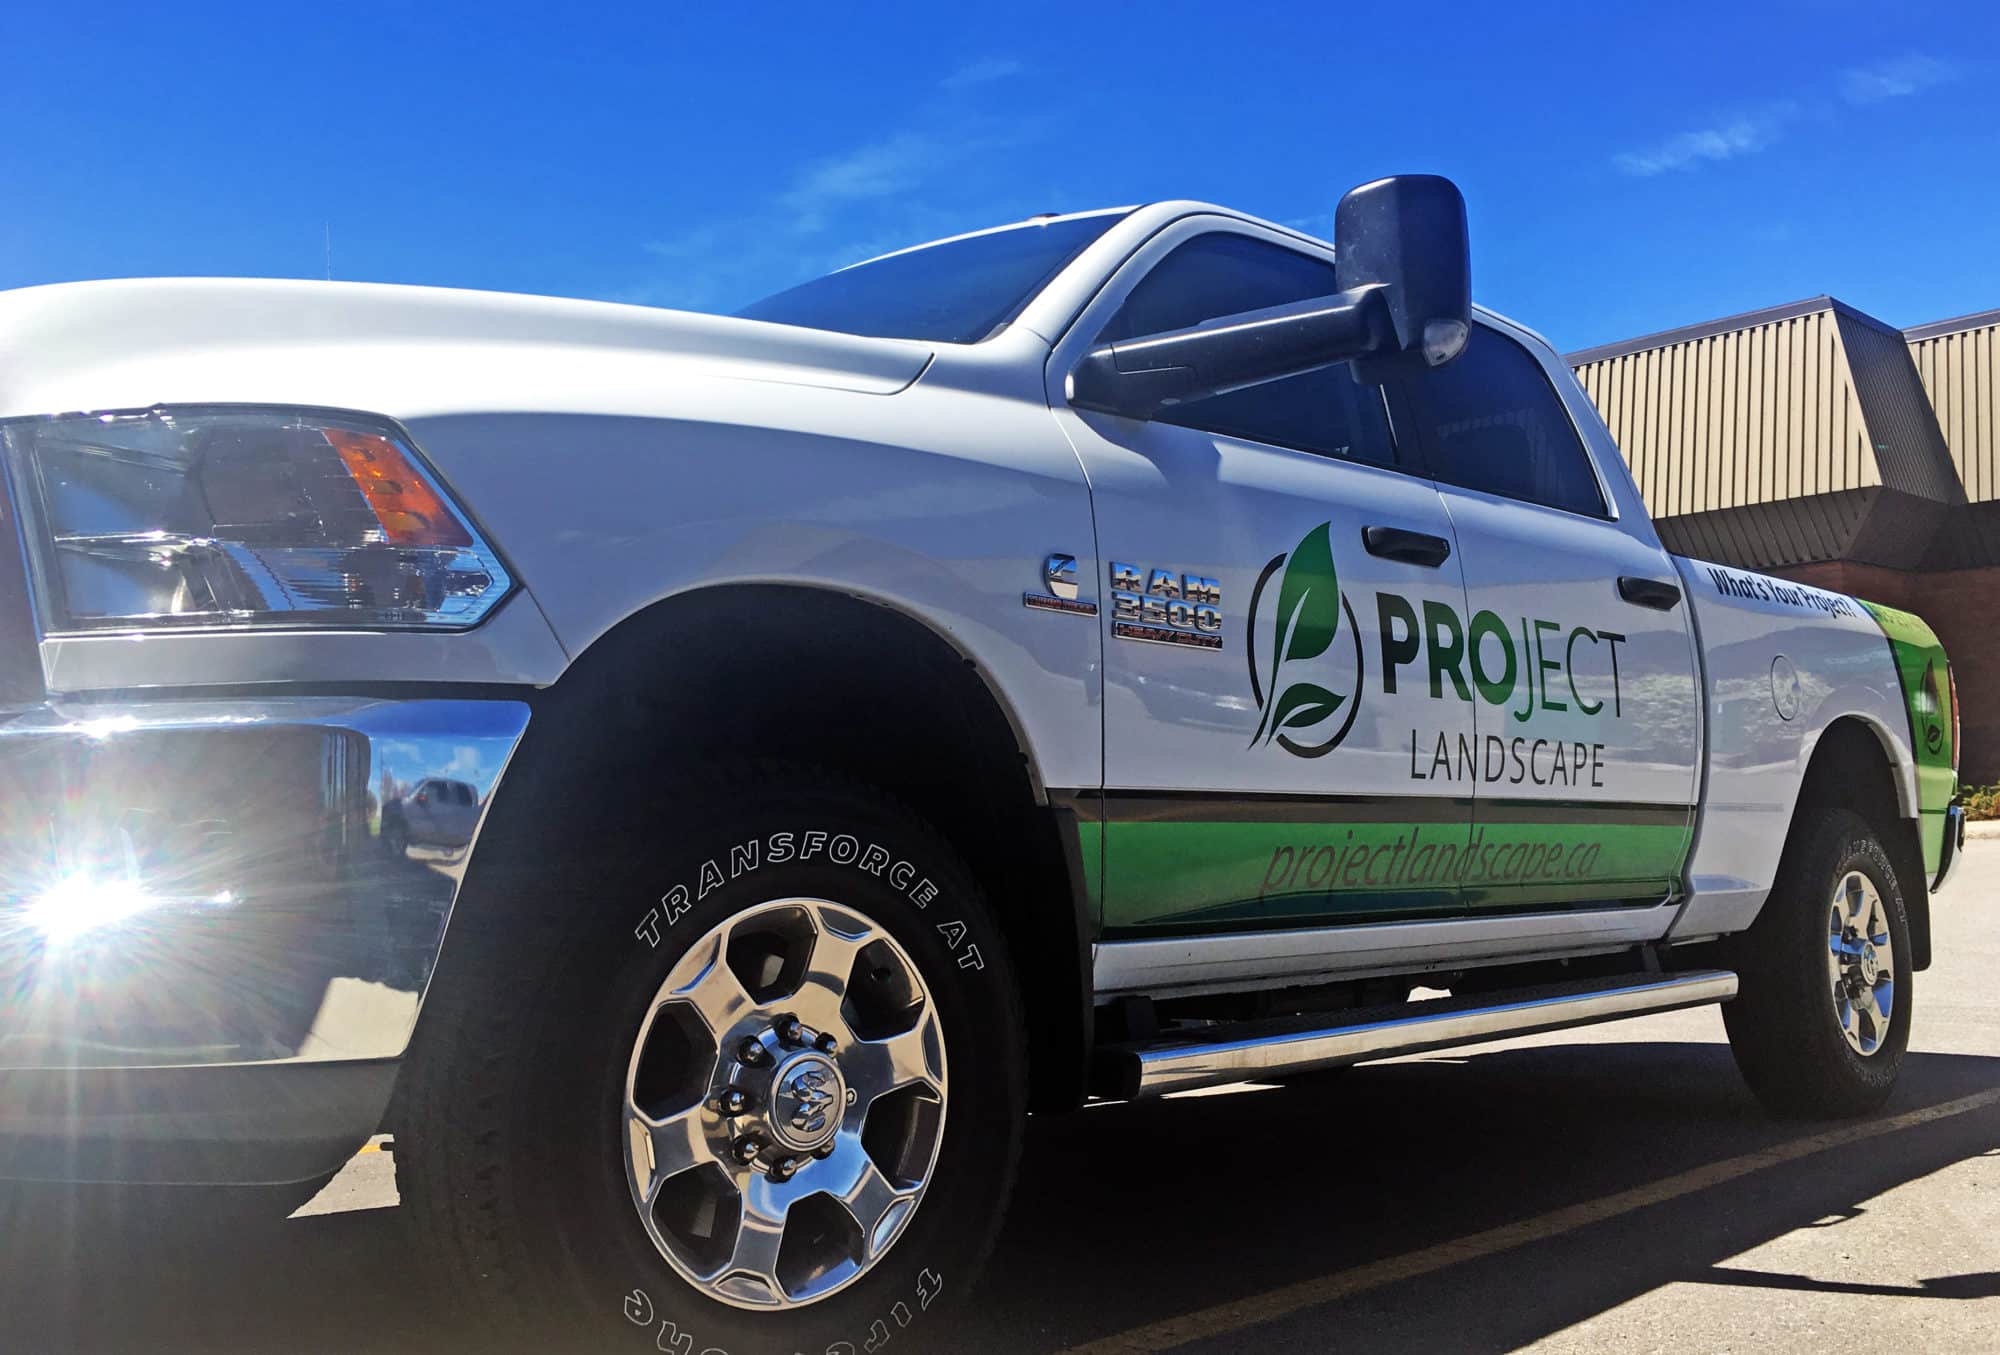 A partial vinyl vehicle wrap, company logo decals, and phone number decals on a company work Dodge pickup truck.